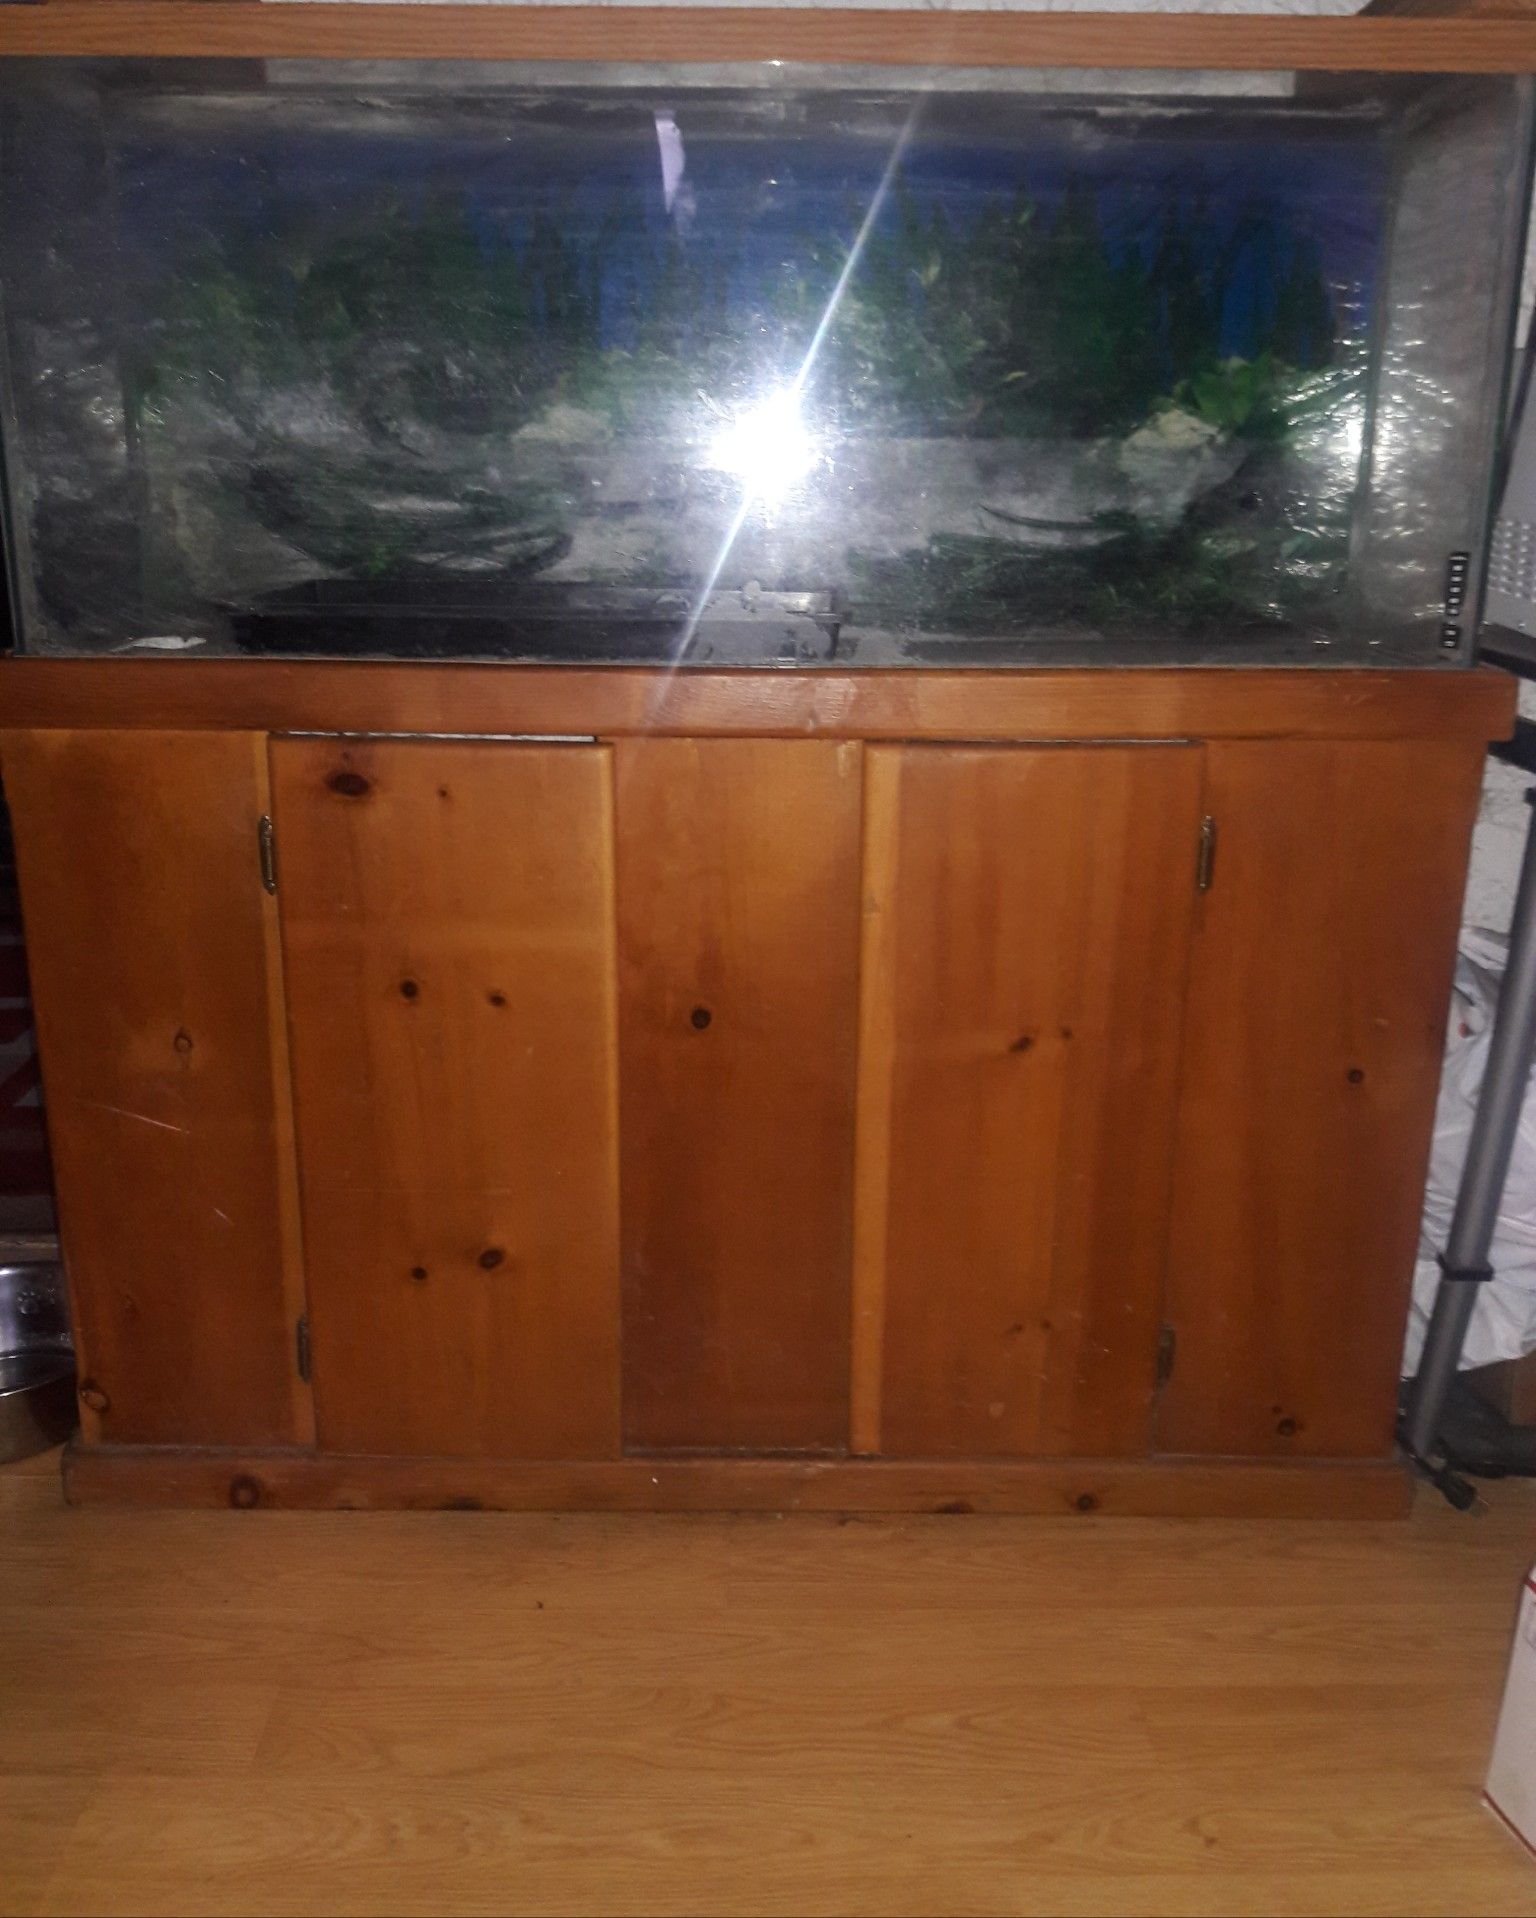 55 gallon fish tank and wood stand